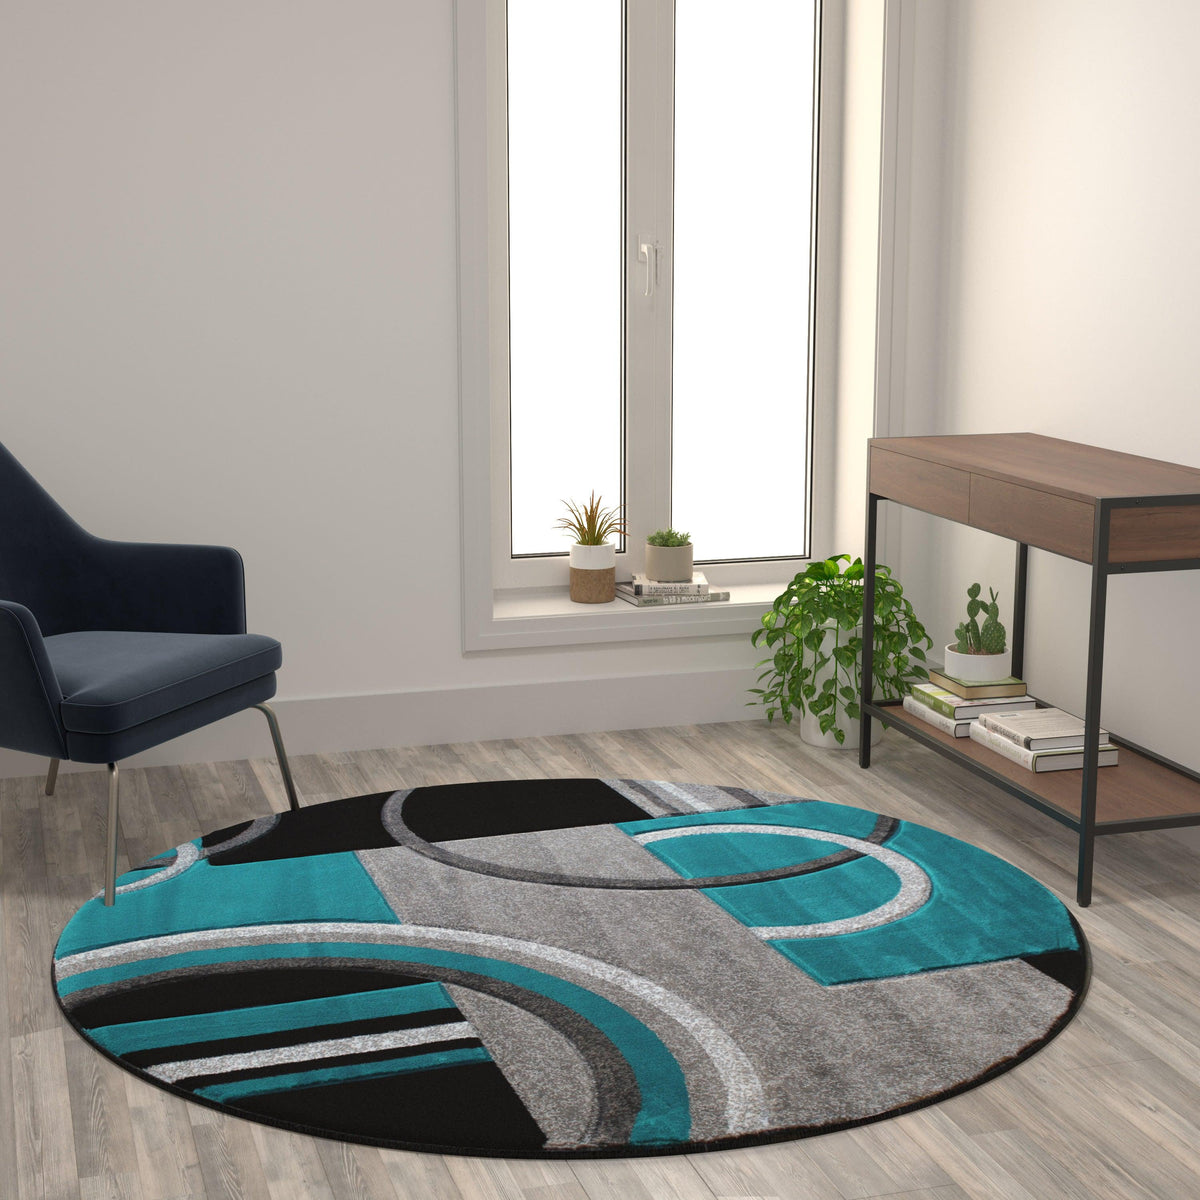 Turquoise,5' Round |#| Modern Geometric Design Abstract Area Rug - Red, Black, & Gray - 5 x 5